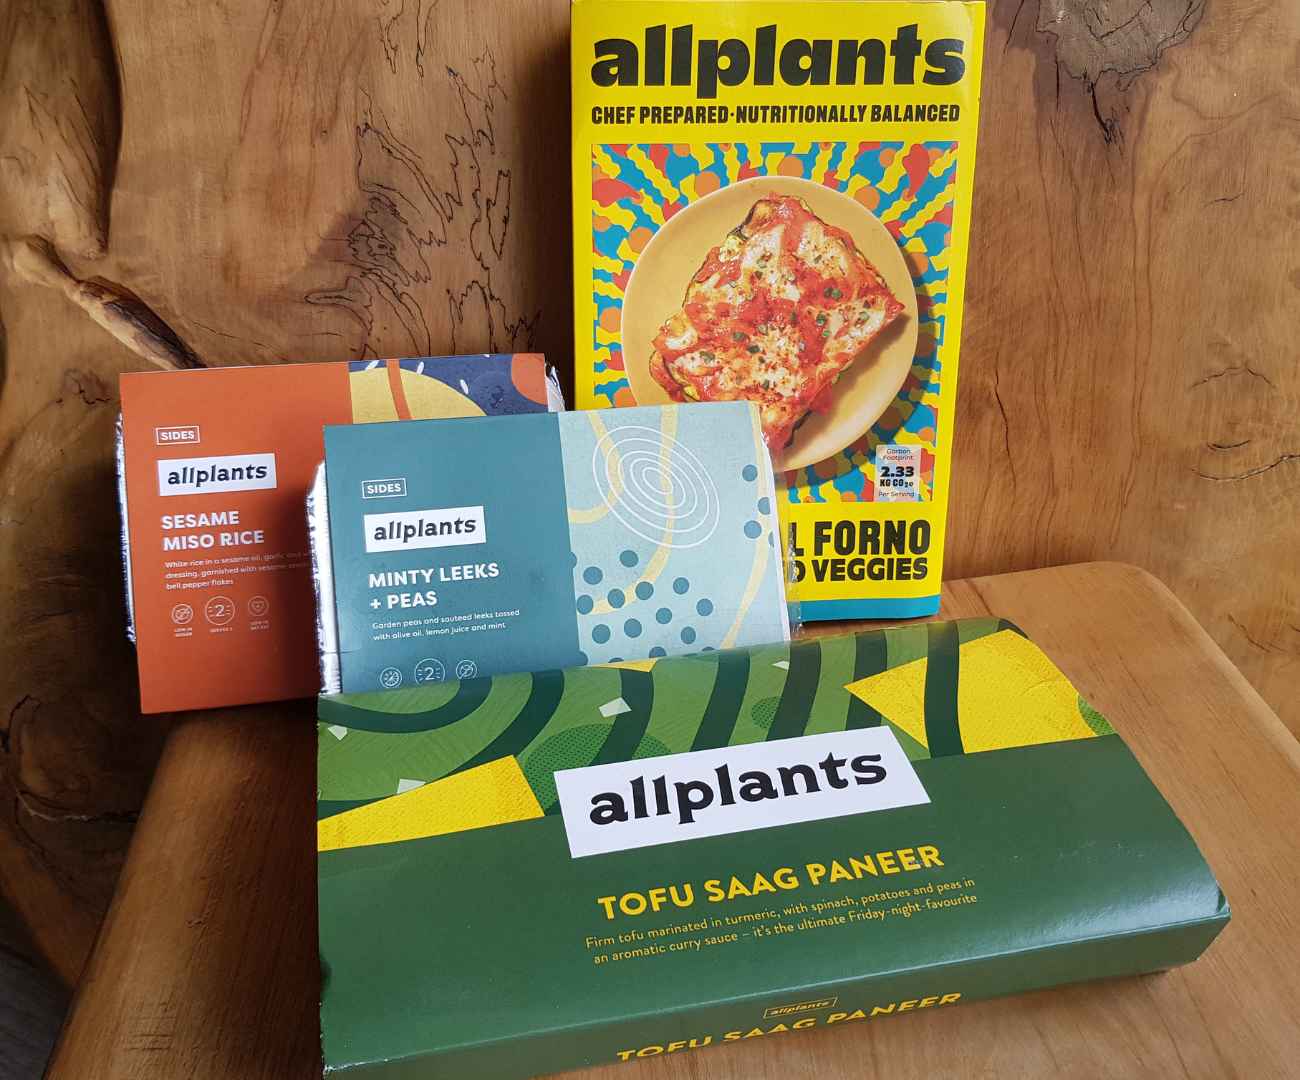 All good with this honest allplants review